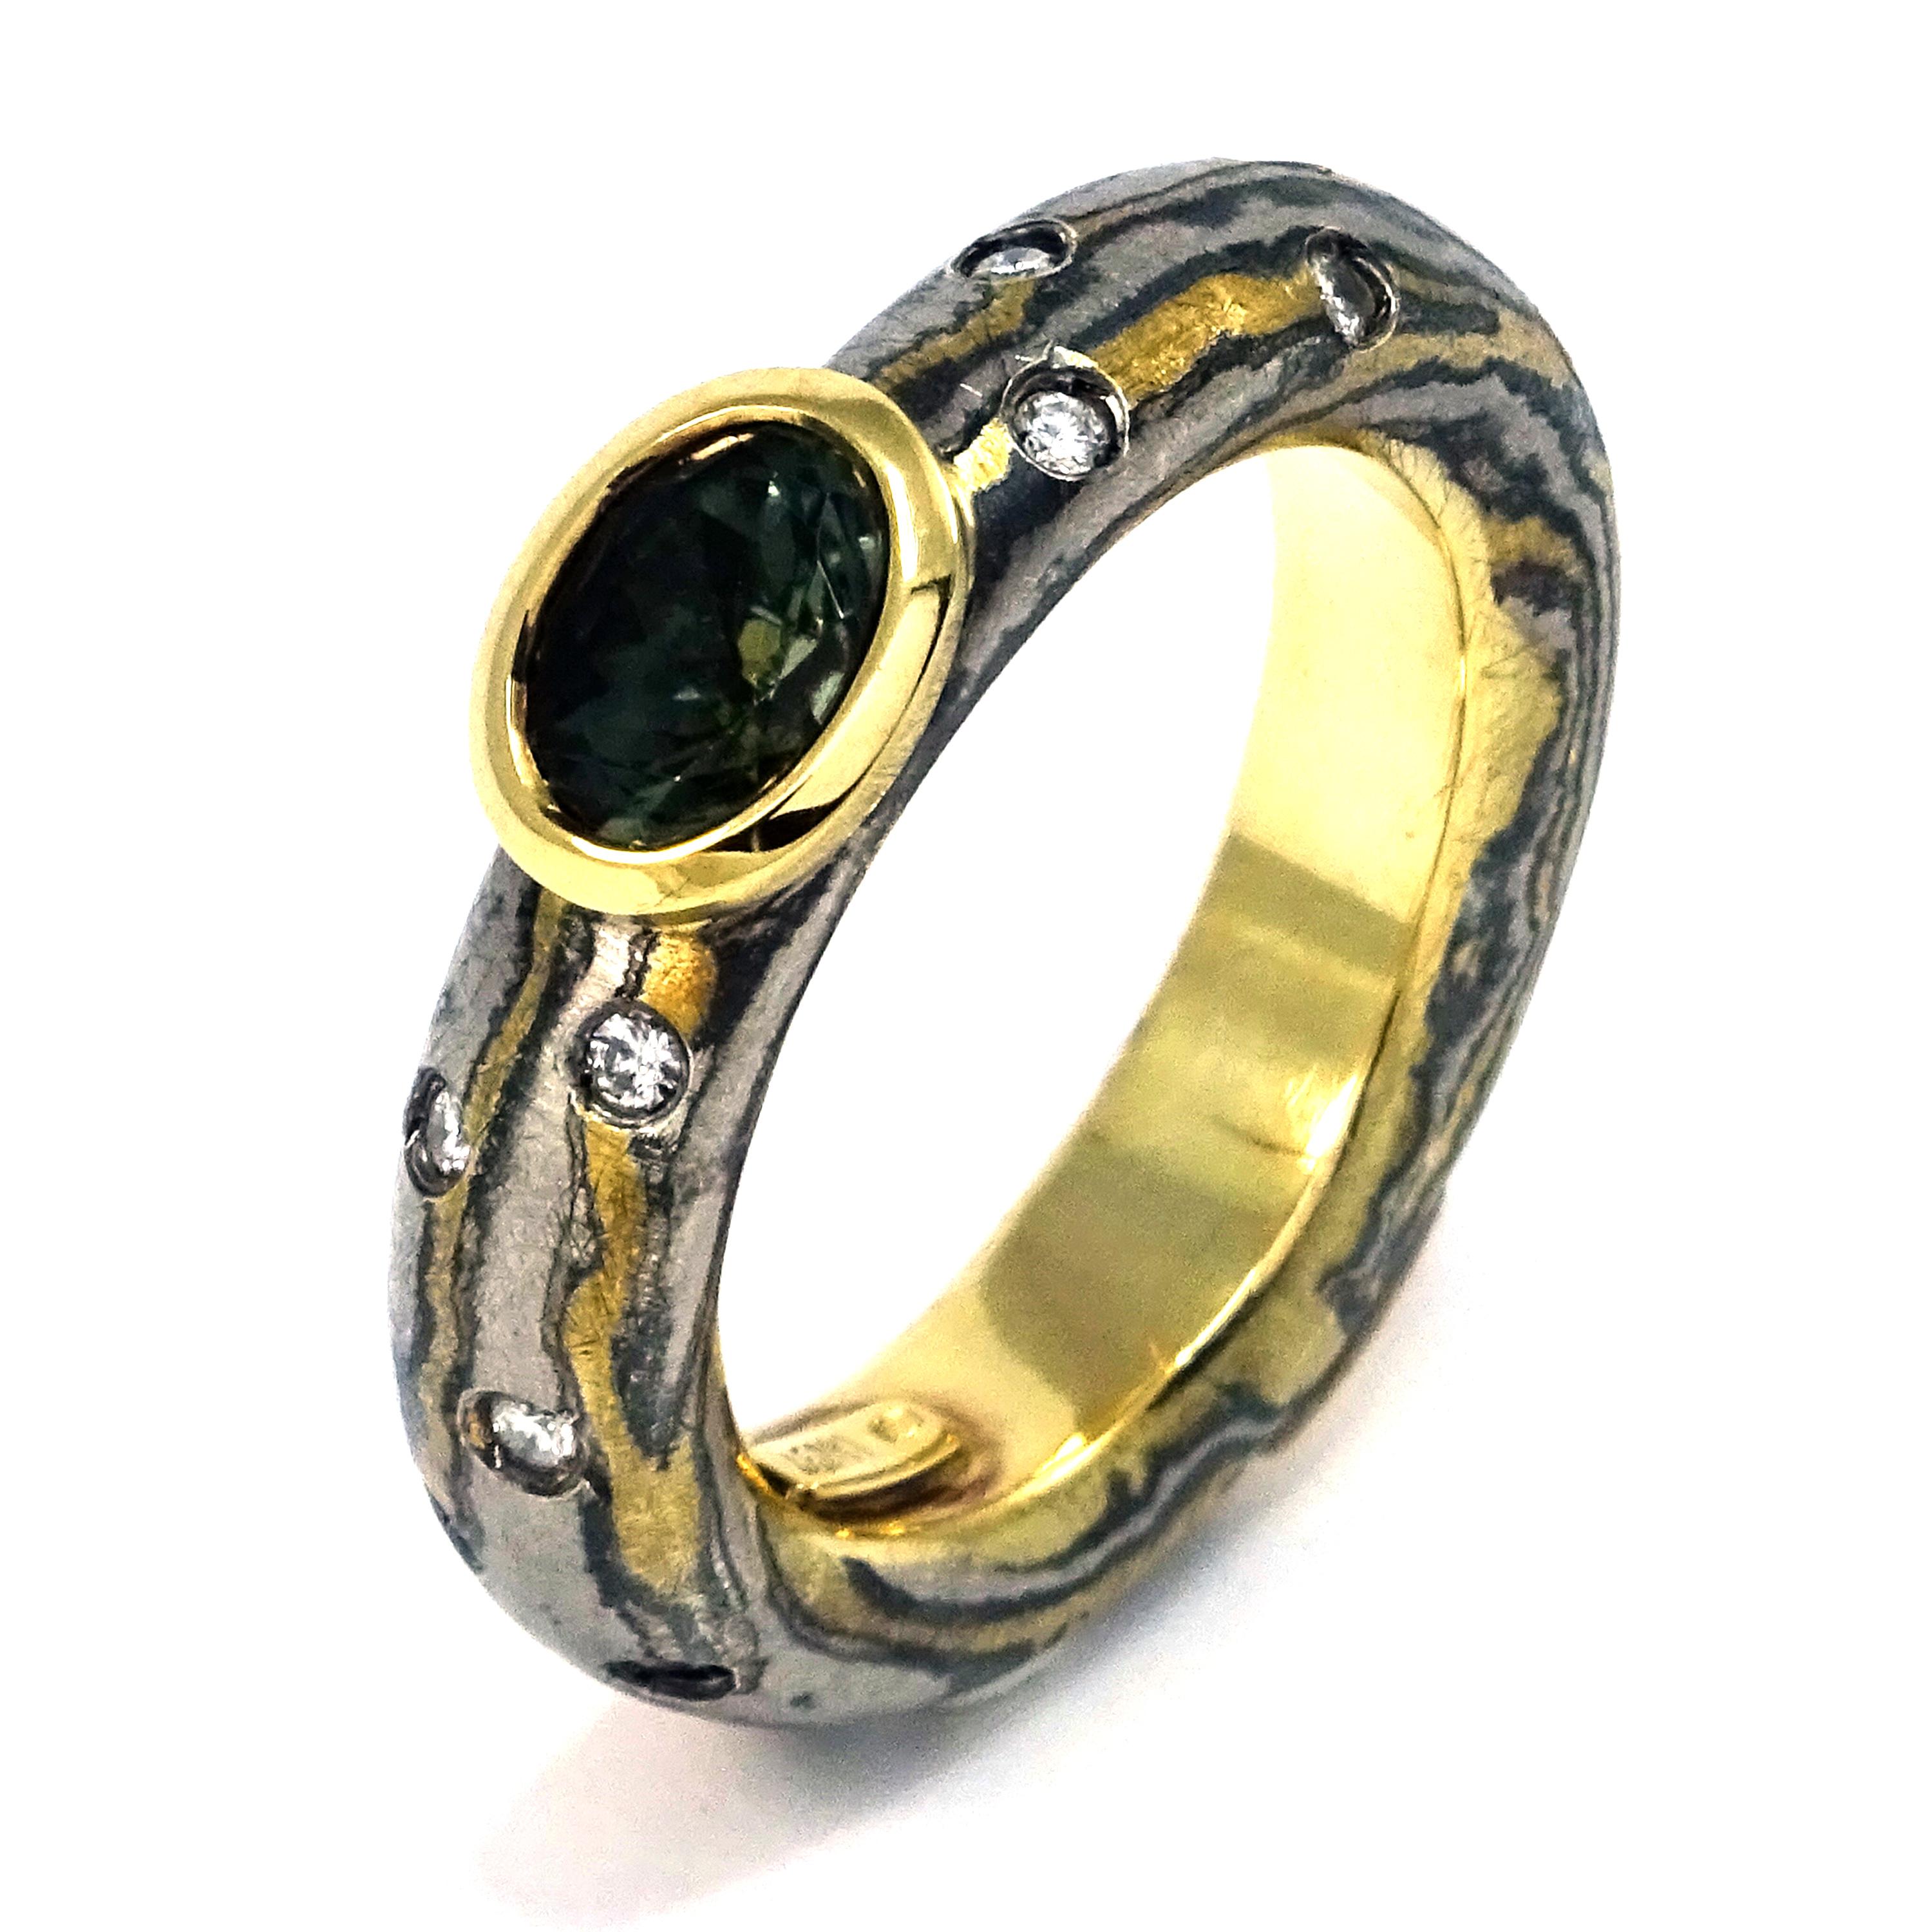 This ring is one of the pieces of the 